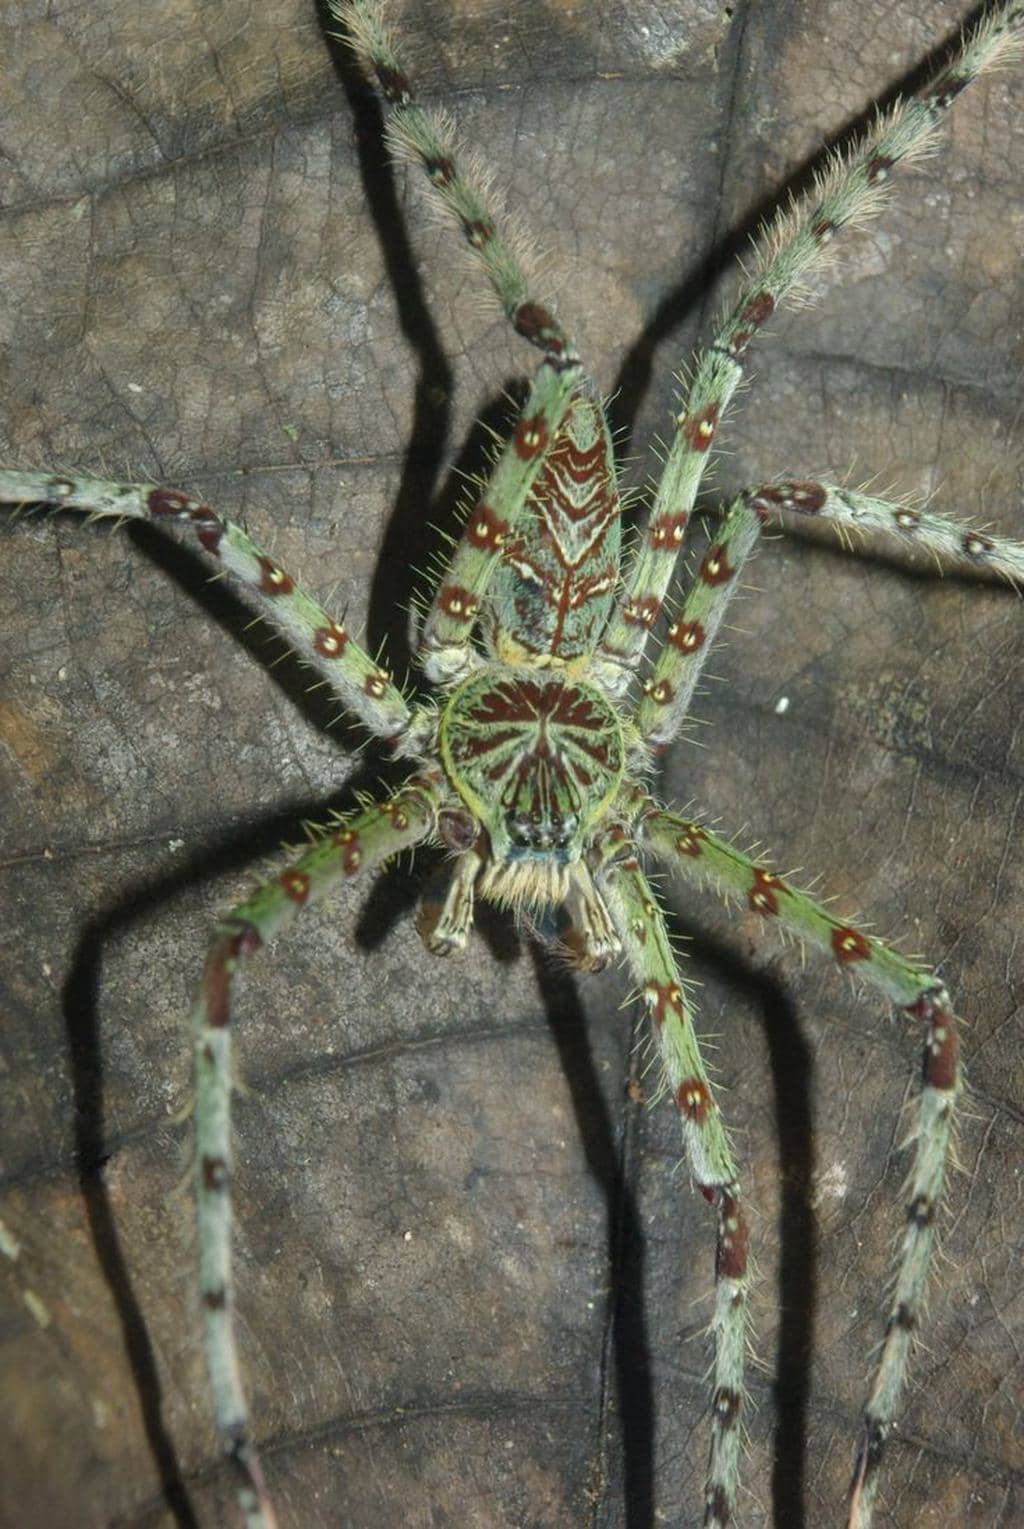  6 Reasons Why Spiders Will Not Crawl On You At Night (Probably)